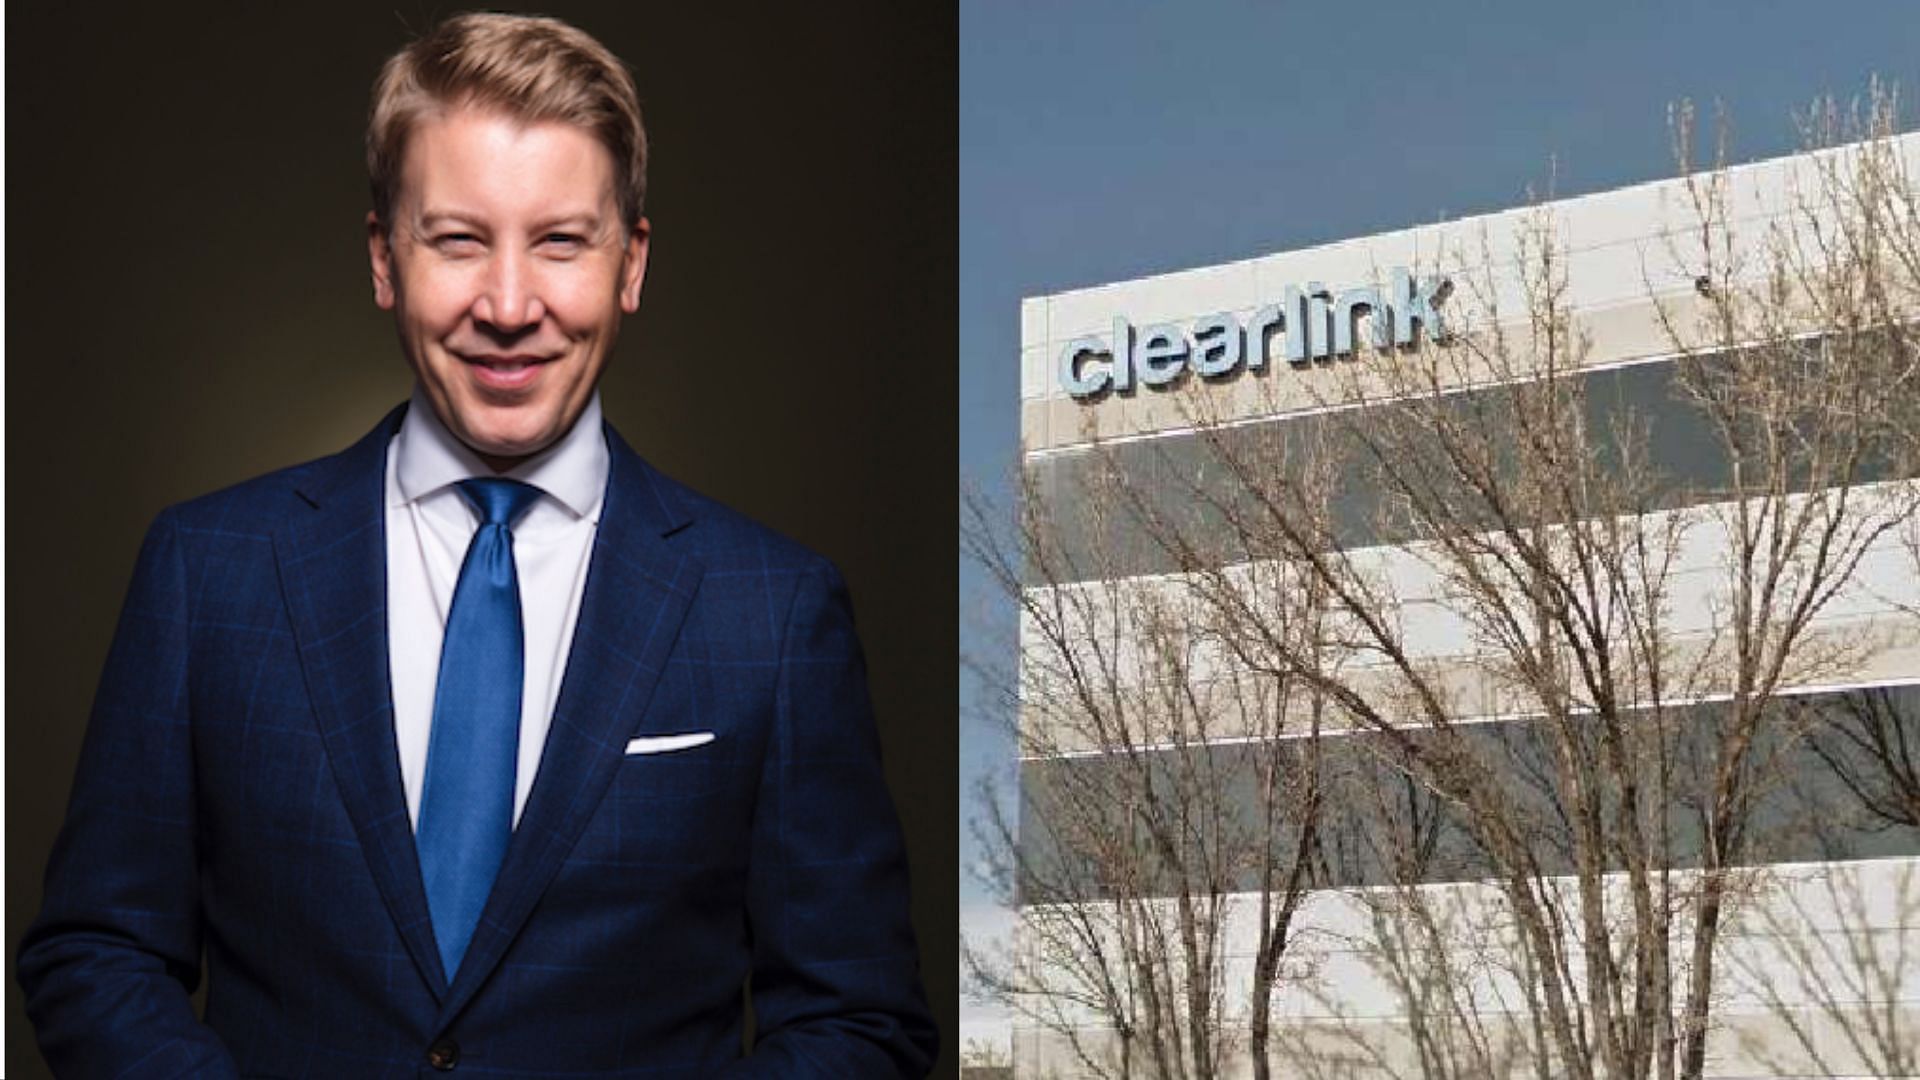 Clearlink CEO James Clarke comes under fire online after sharing employee-dog anecdote. (Image via uvu.edu, Google Maps)